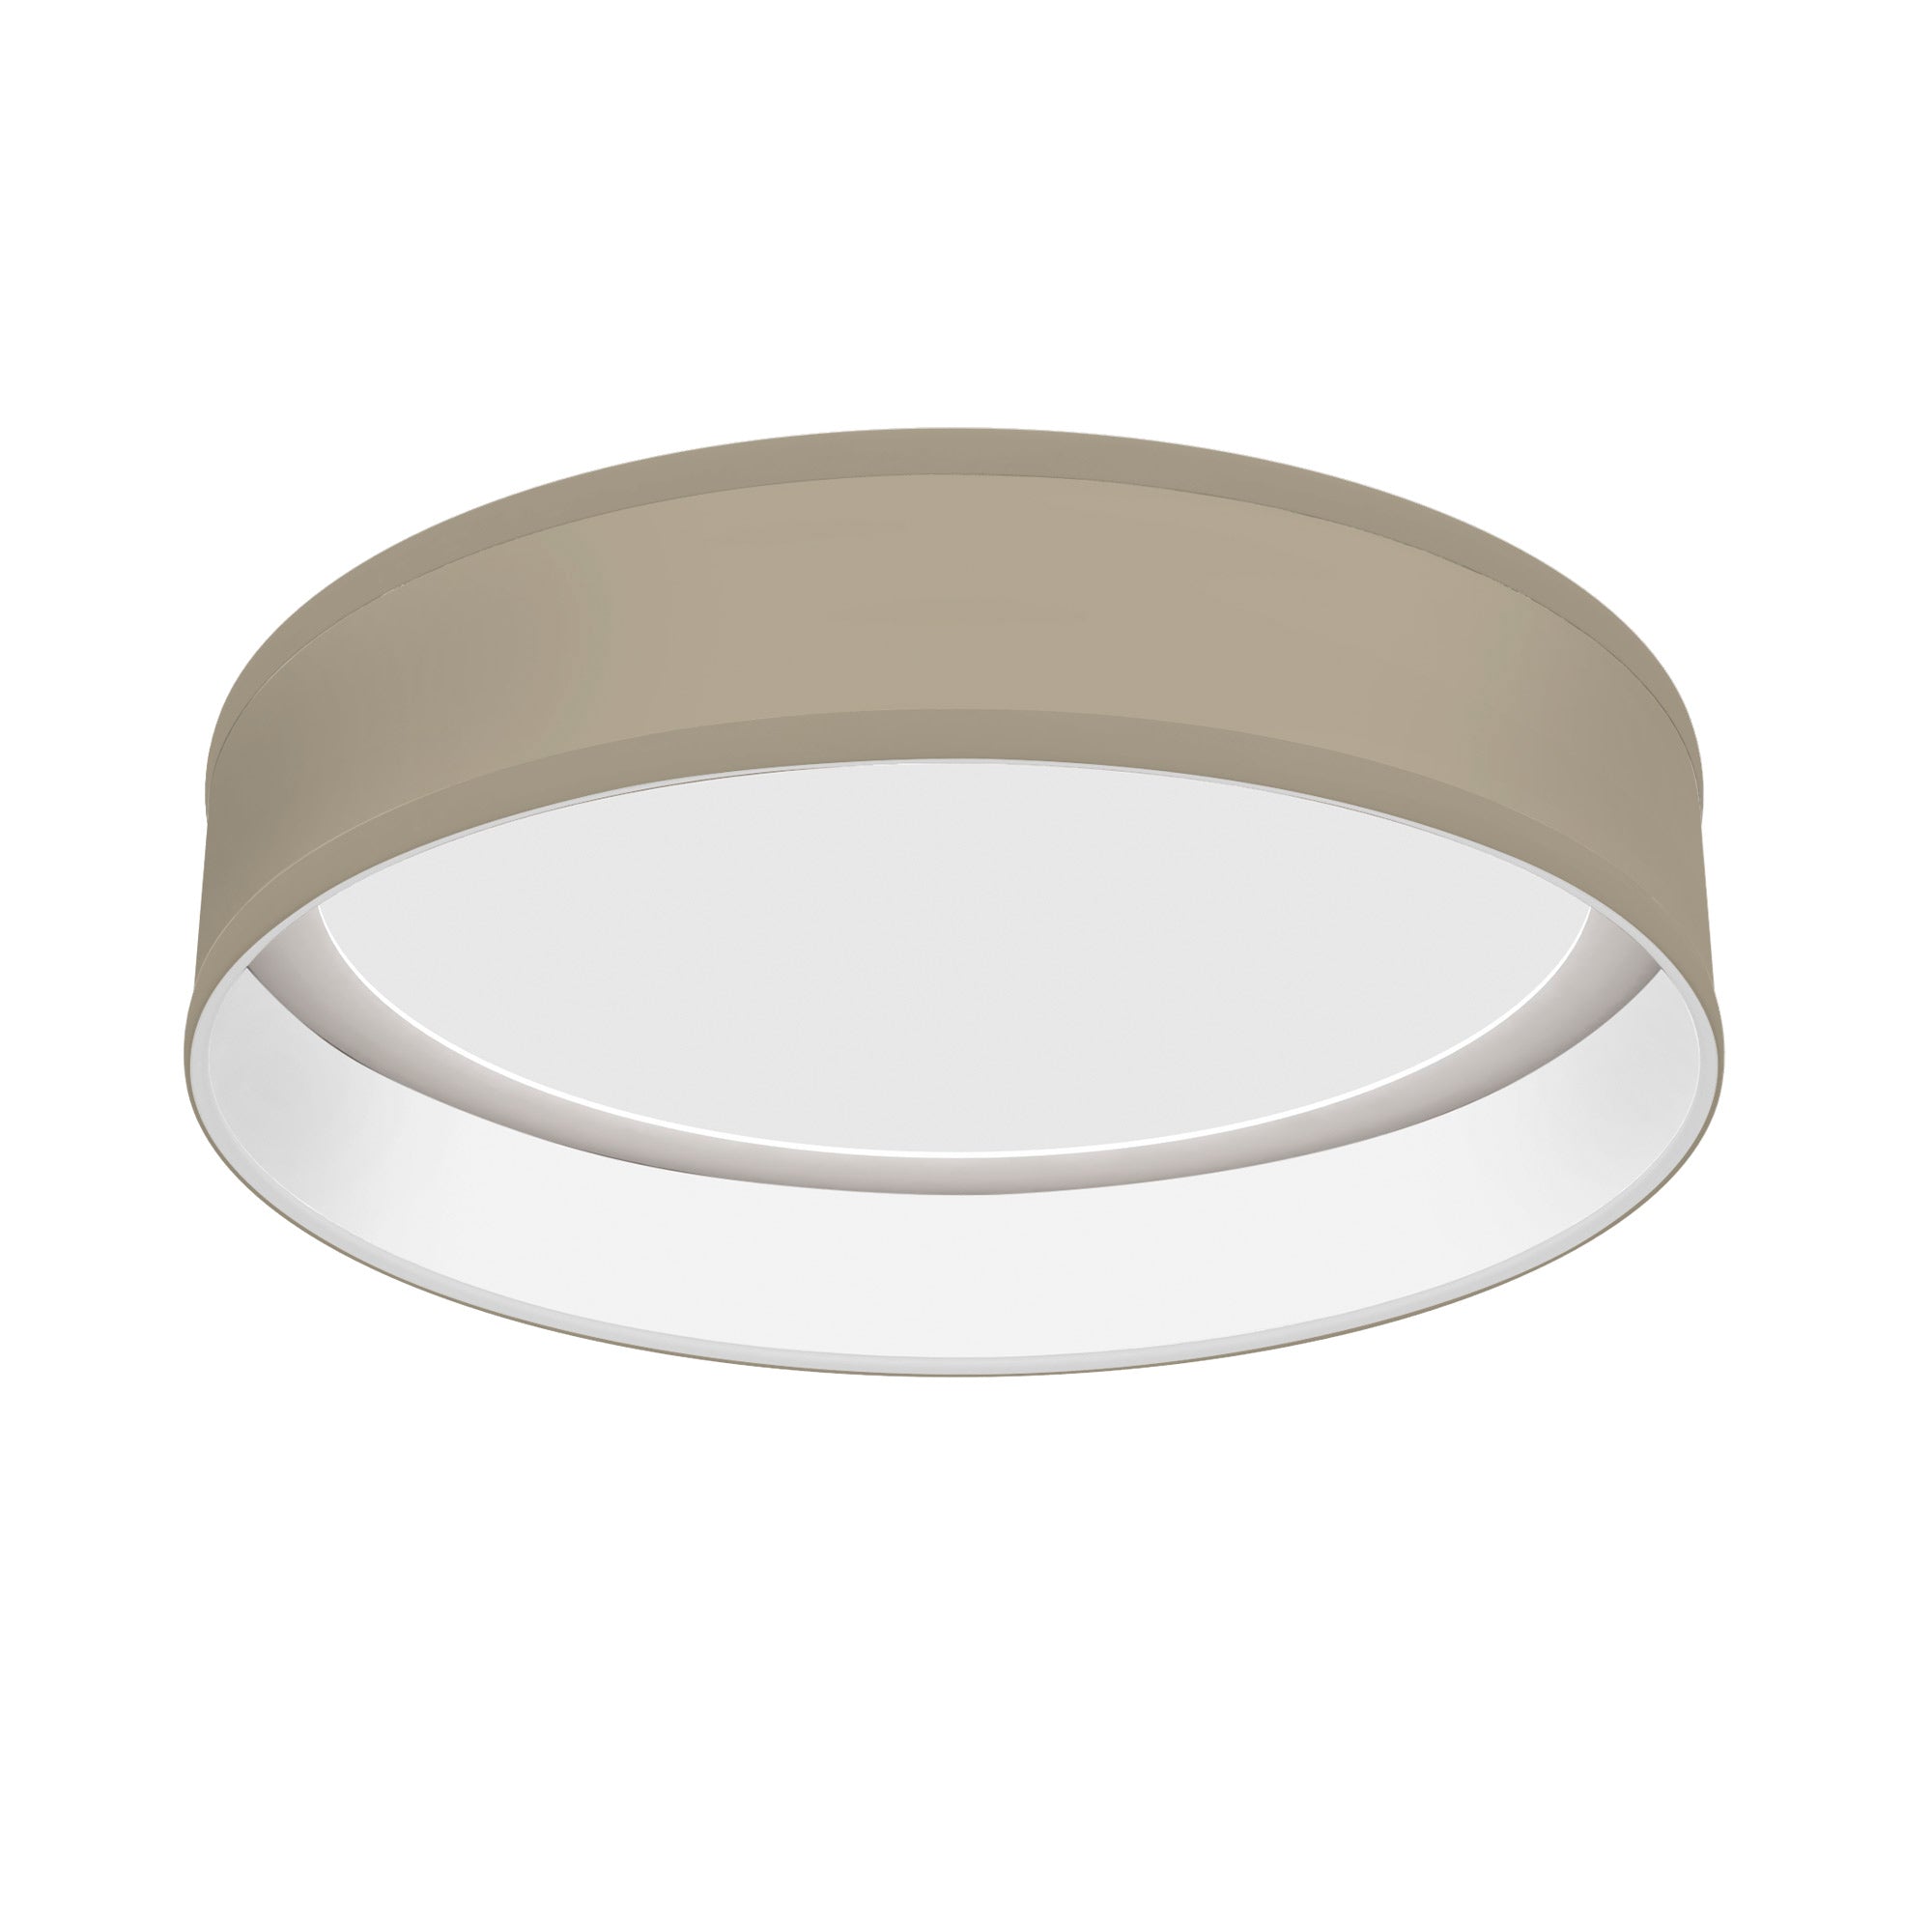 The Vince Flush Mount from Seascape Fixtures with a linen shade in tan color.